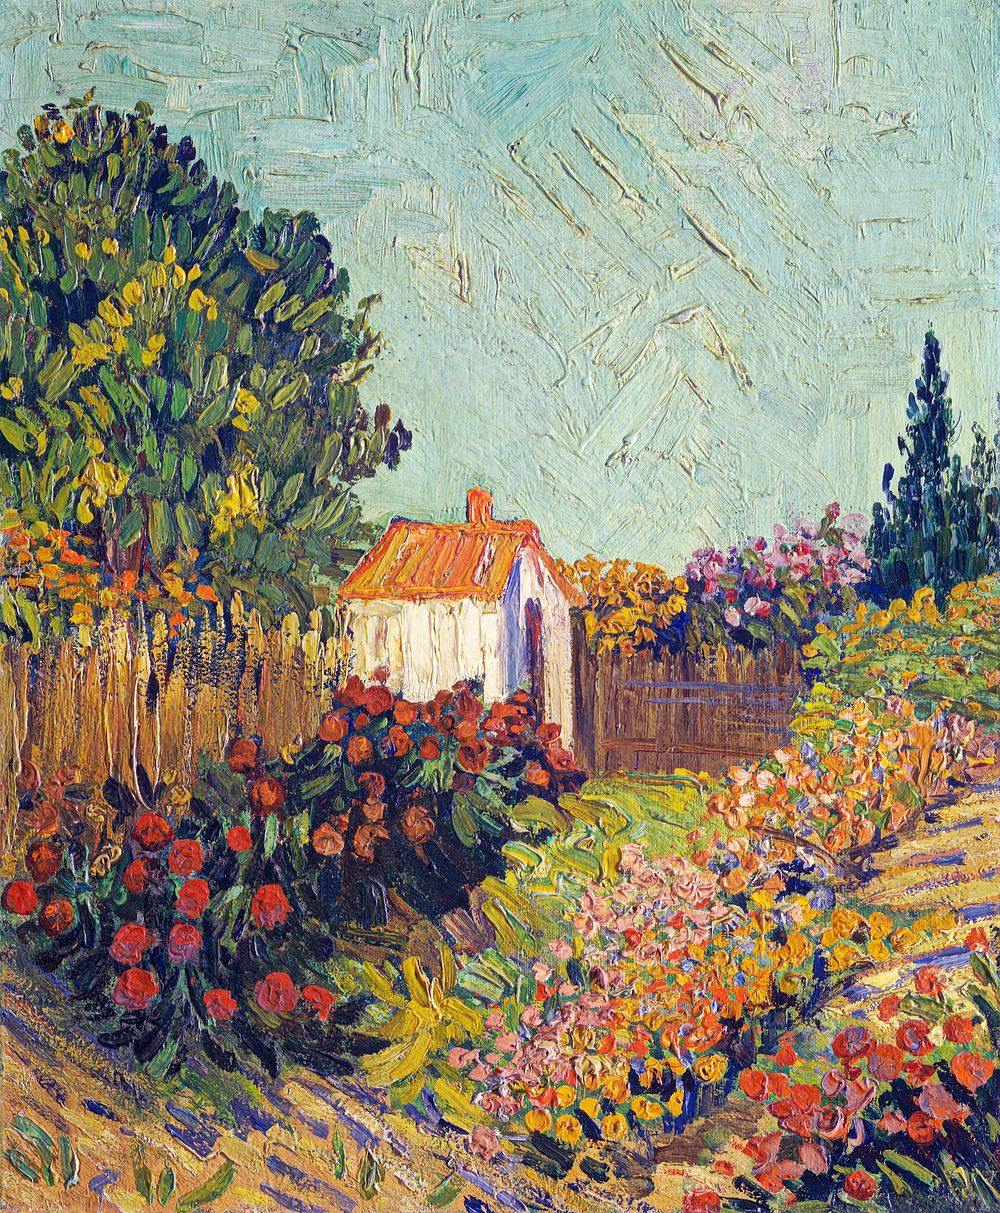 Landscape (1925&ndash;1928) by Vincent van Gogh. Original from The National Gallery of Art. Digitally enhanced by rawpixel.